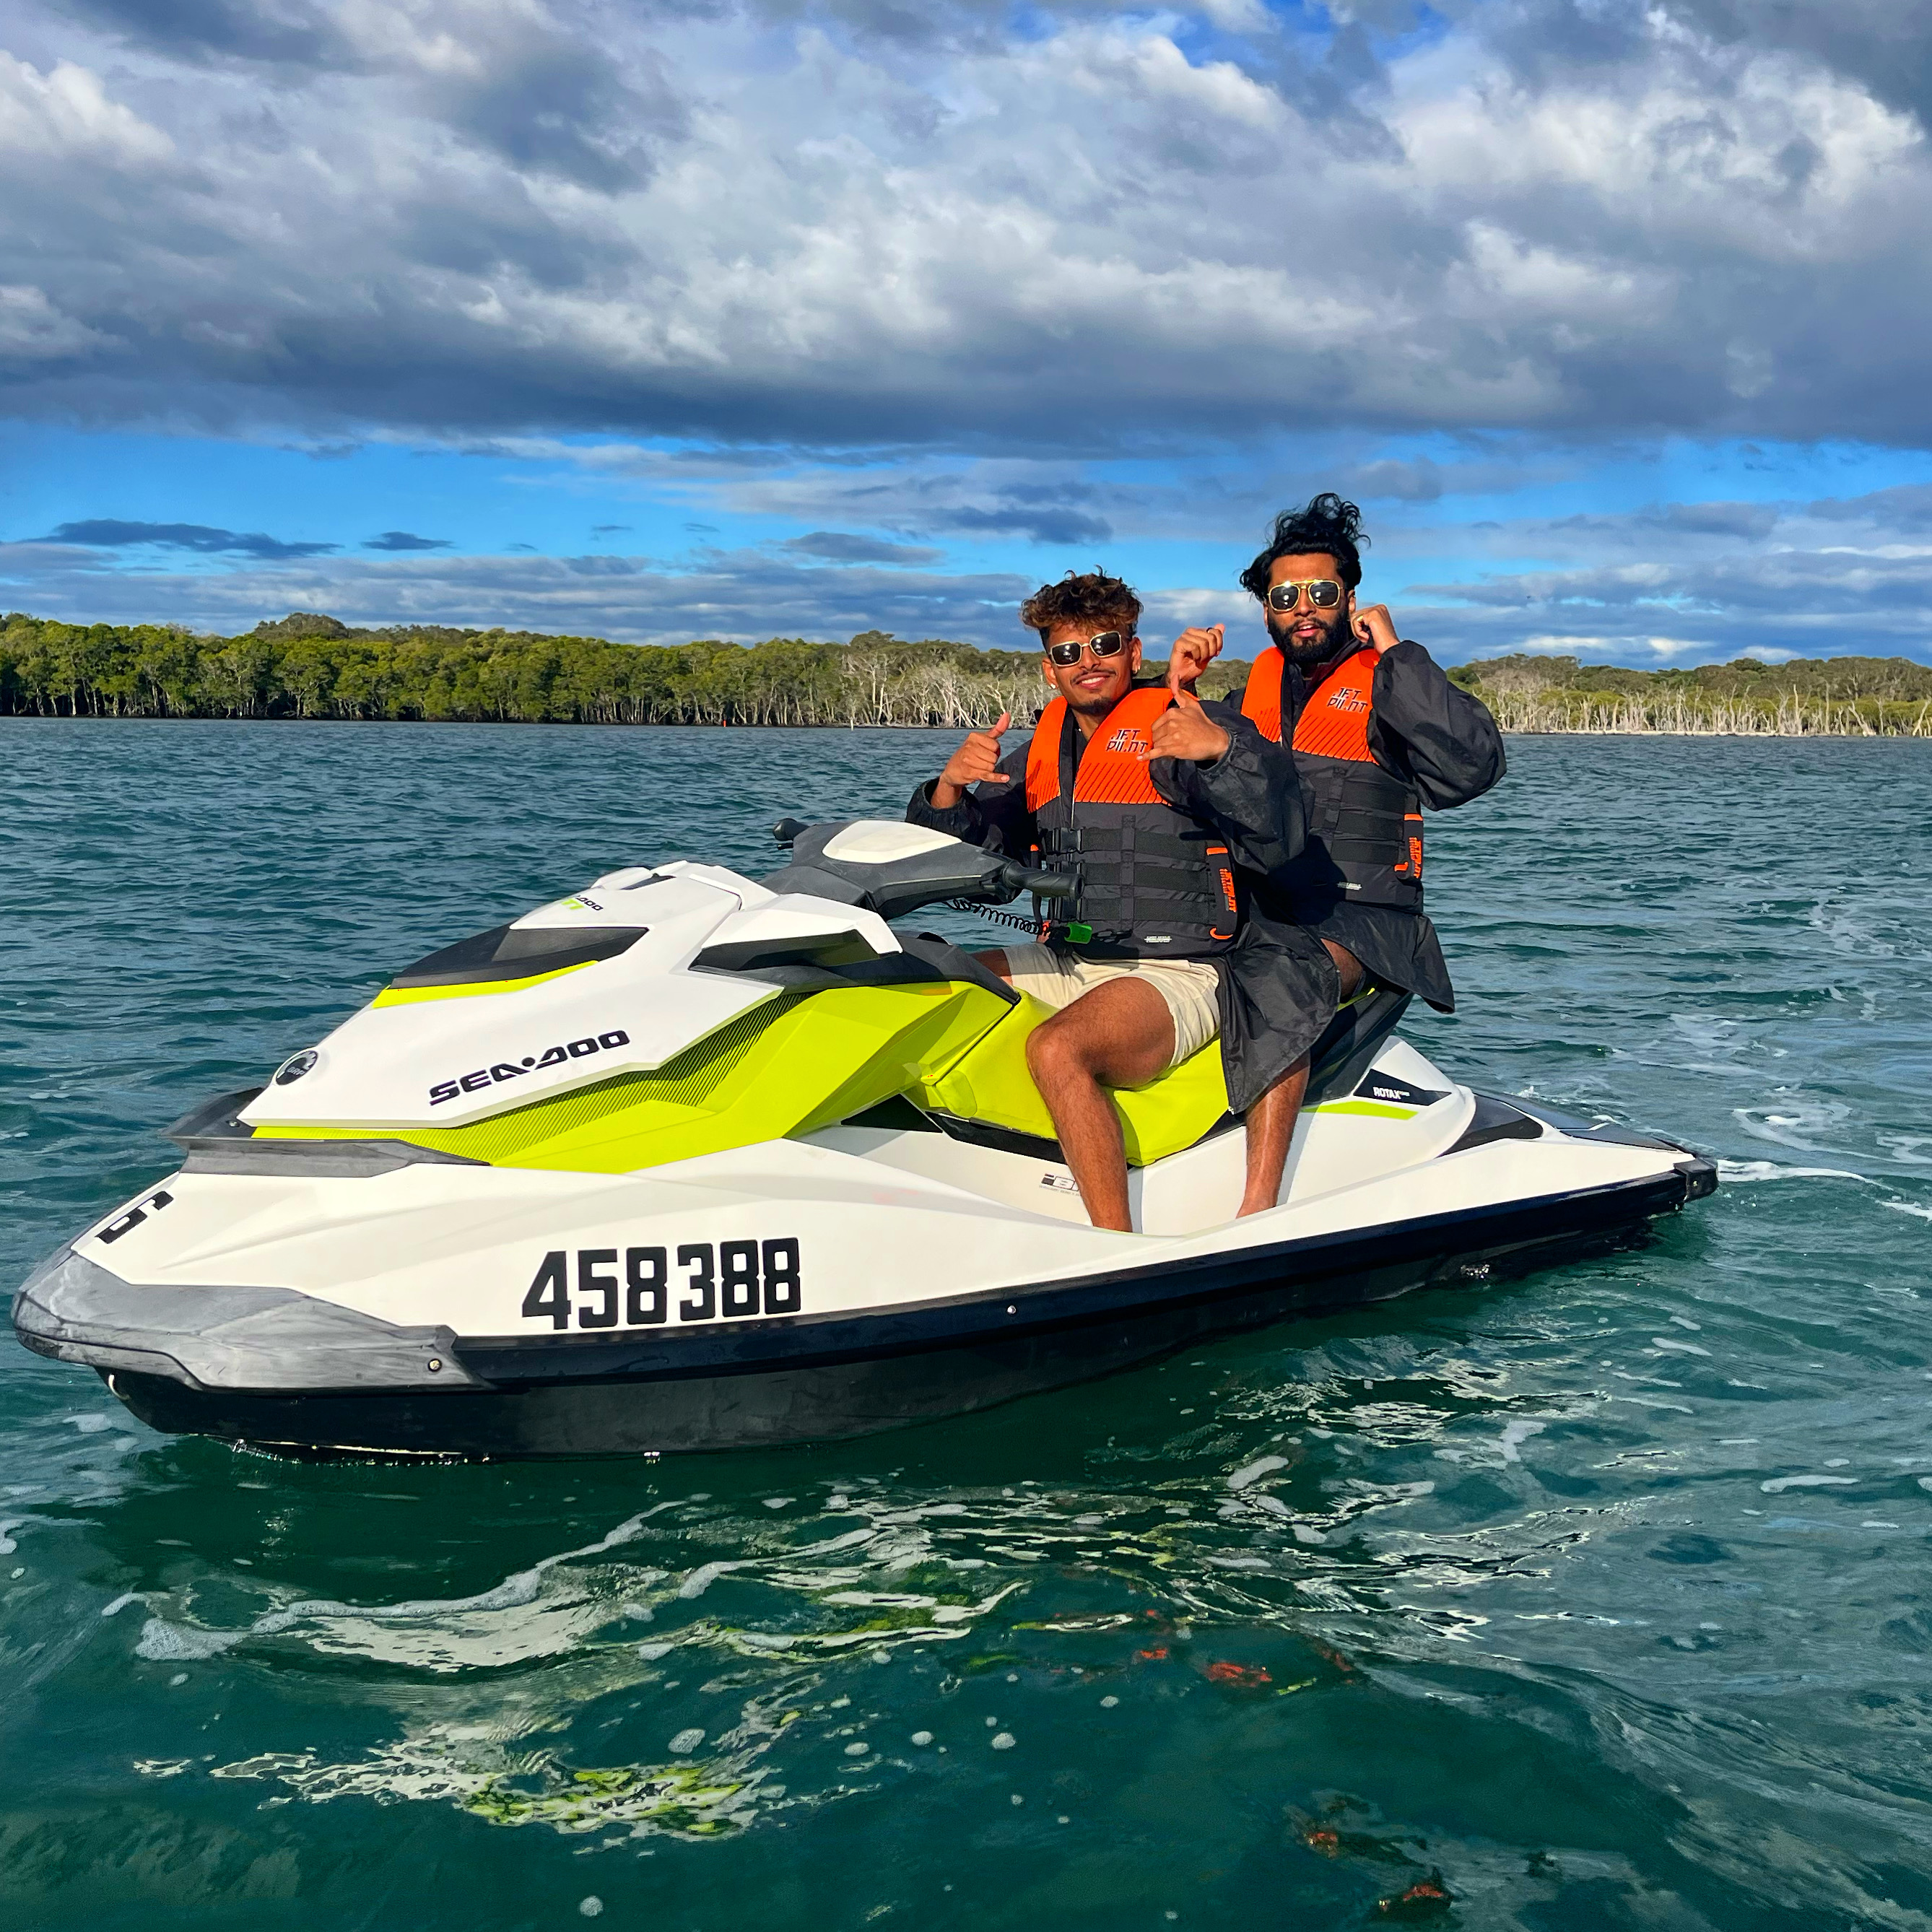  The most fun way to see the Gold Coast! Voted best value tour on the Coast! Exhilarating Adrenaline pumping Adventure Tour! 